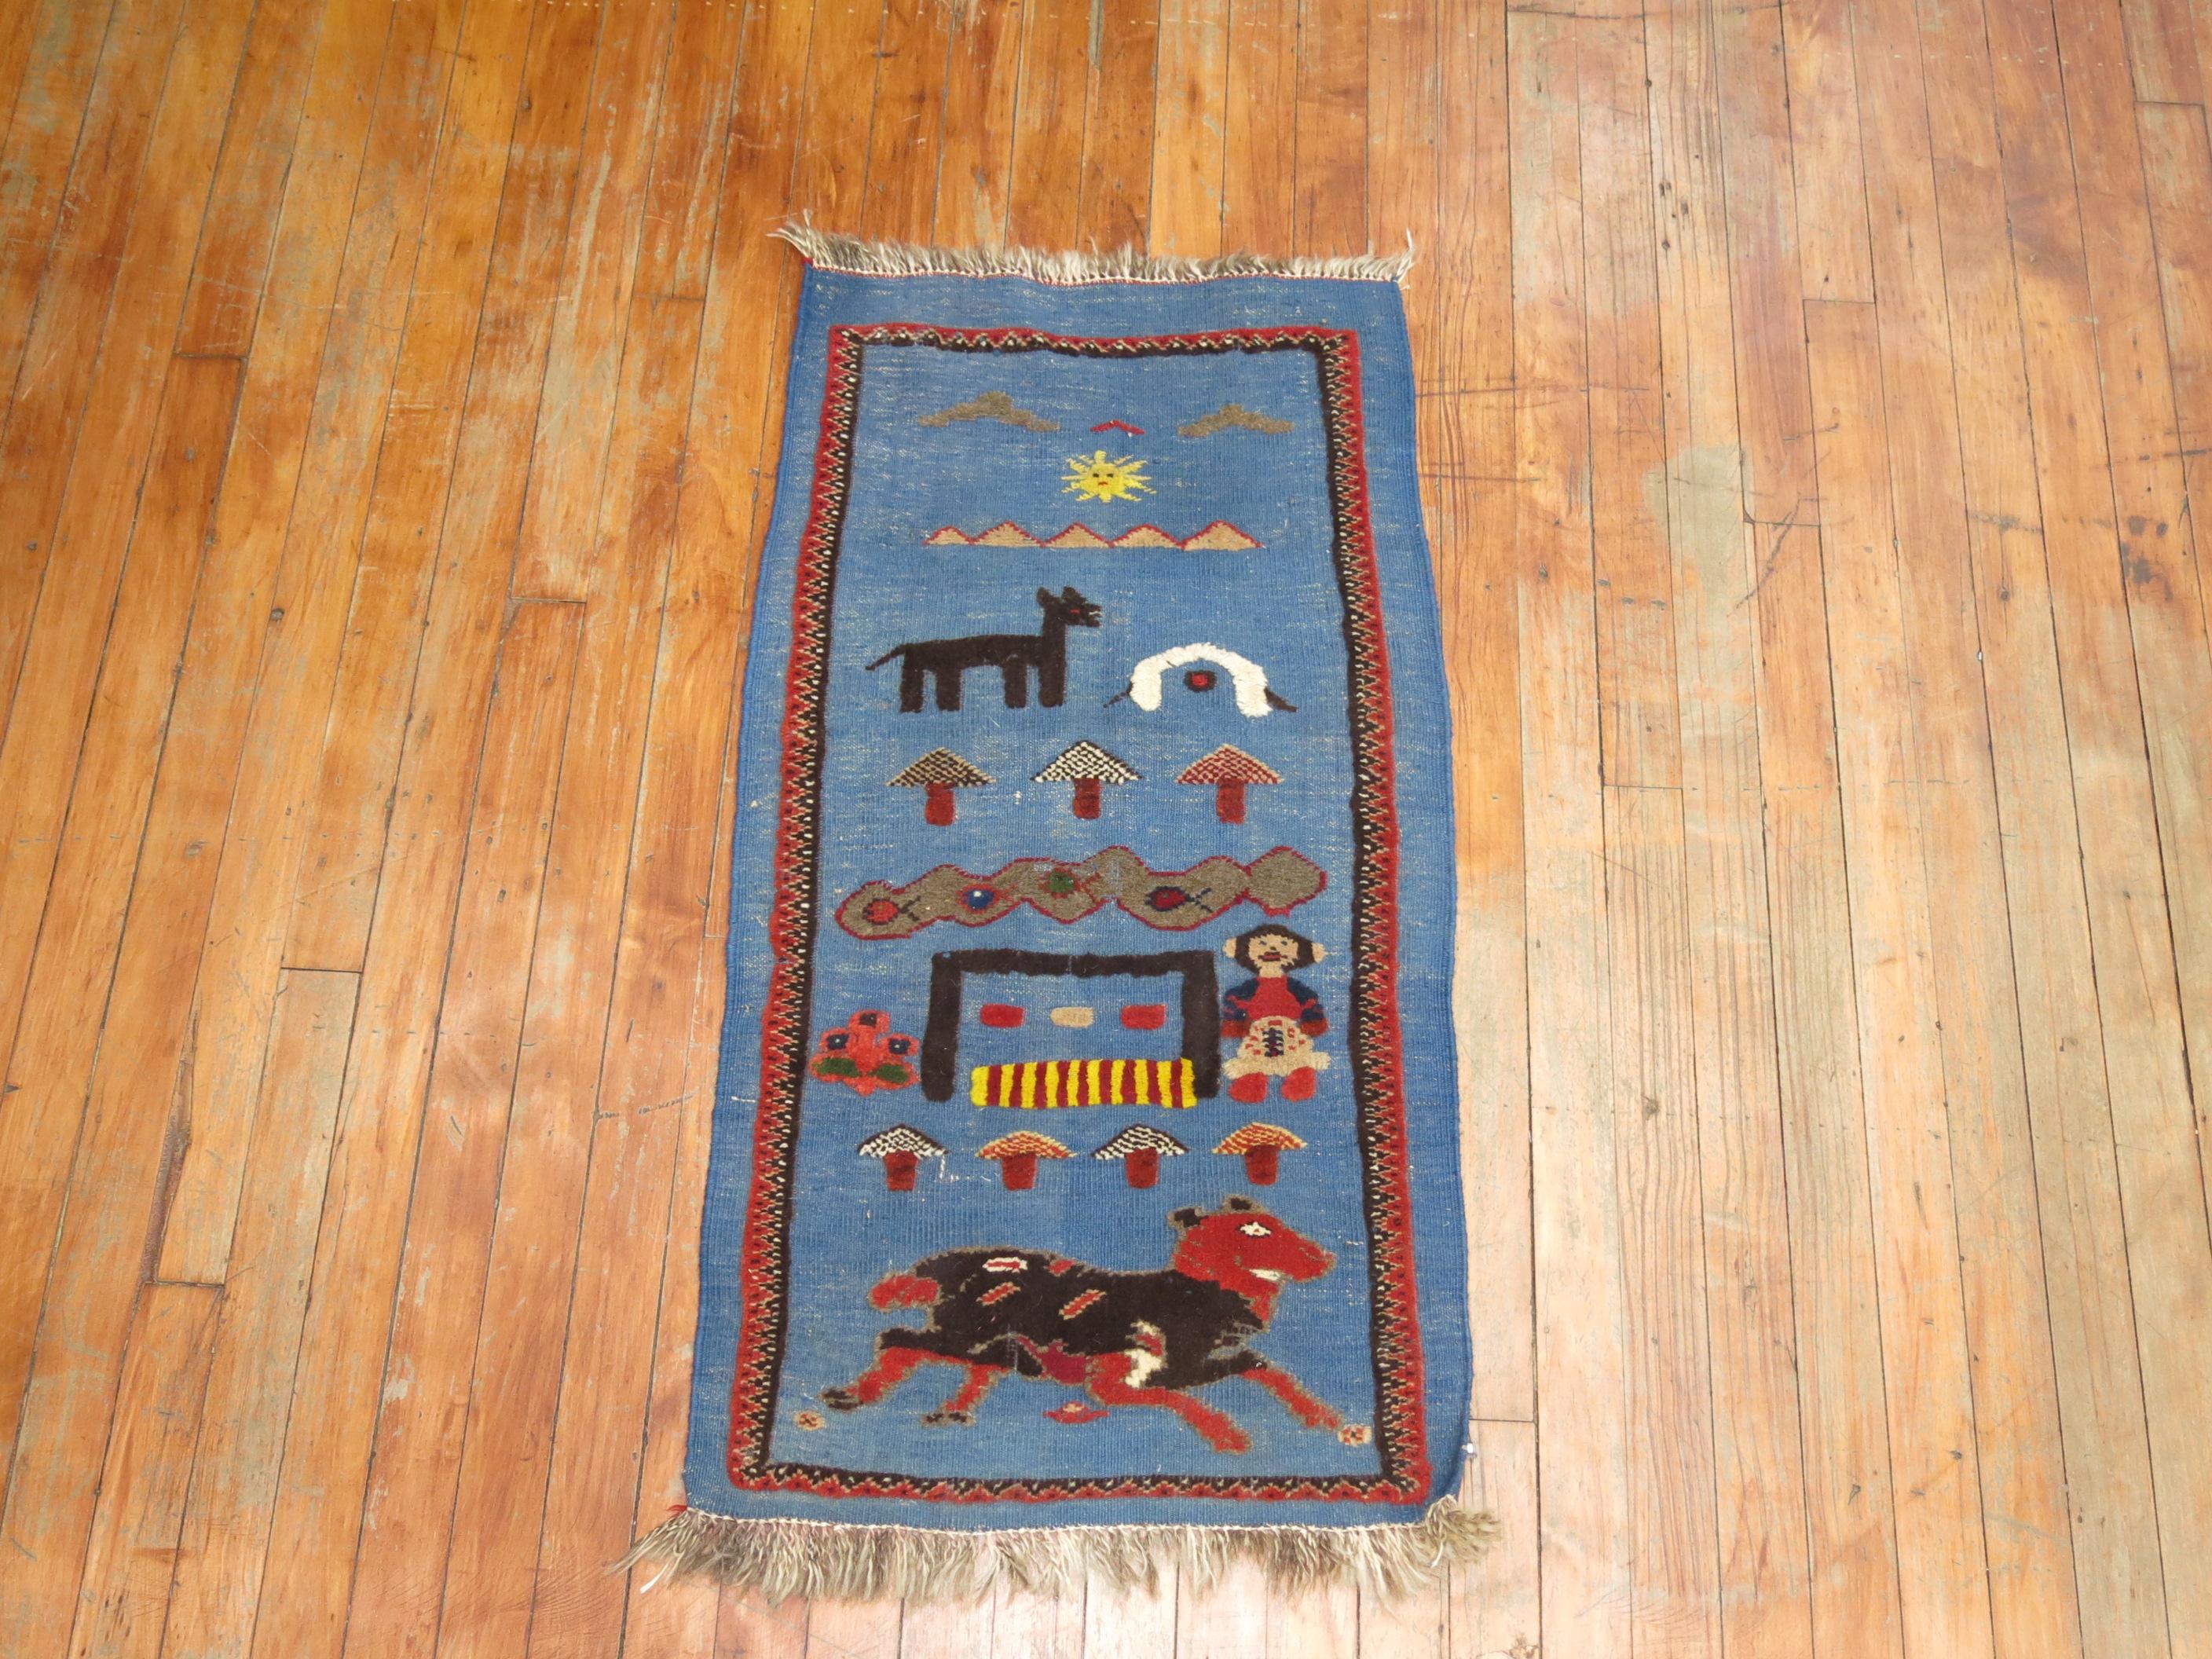 A mid-20th century Souf carpet woven somewhere in Central Iran. 

Souf rugs are very rare technique found as they have a raised low and high pile technique. They are popular in Iran and little understood elsewhere except by Persians and people who